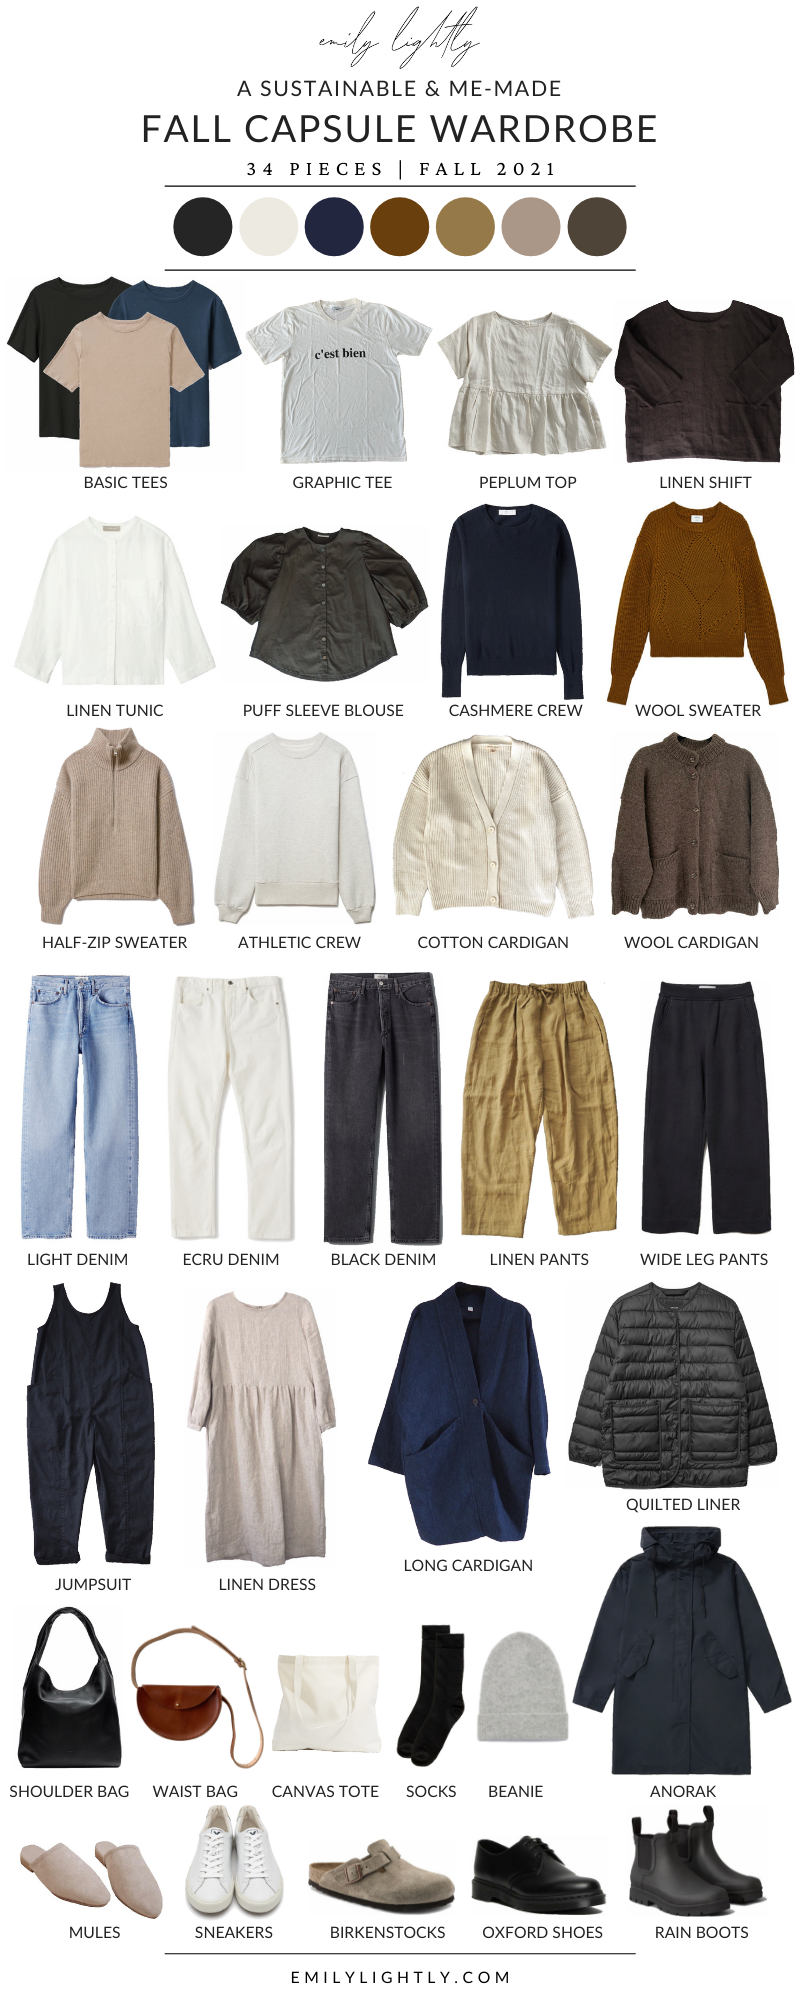 A sustainable & me-made fall capsule wardrobe